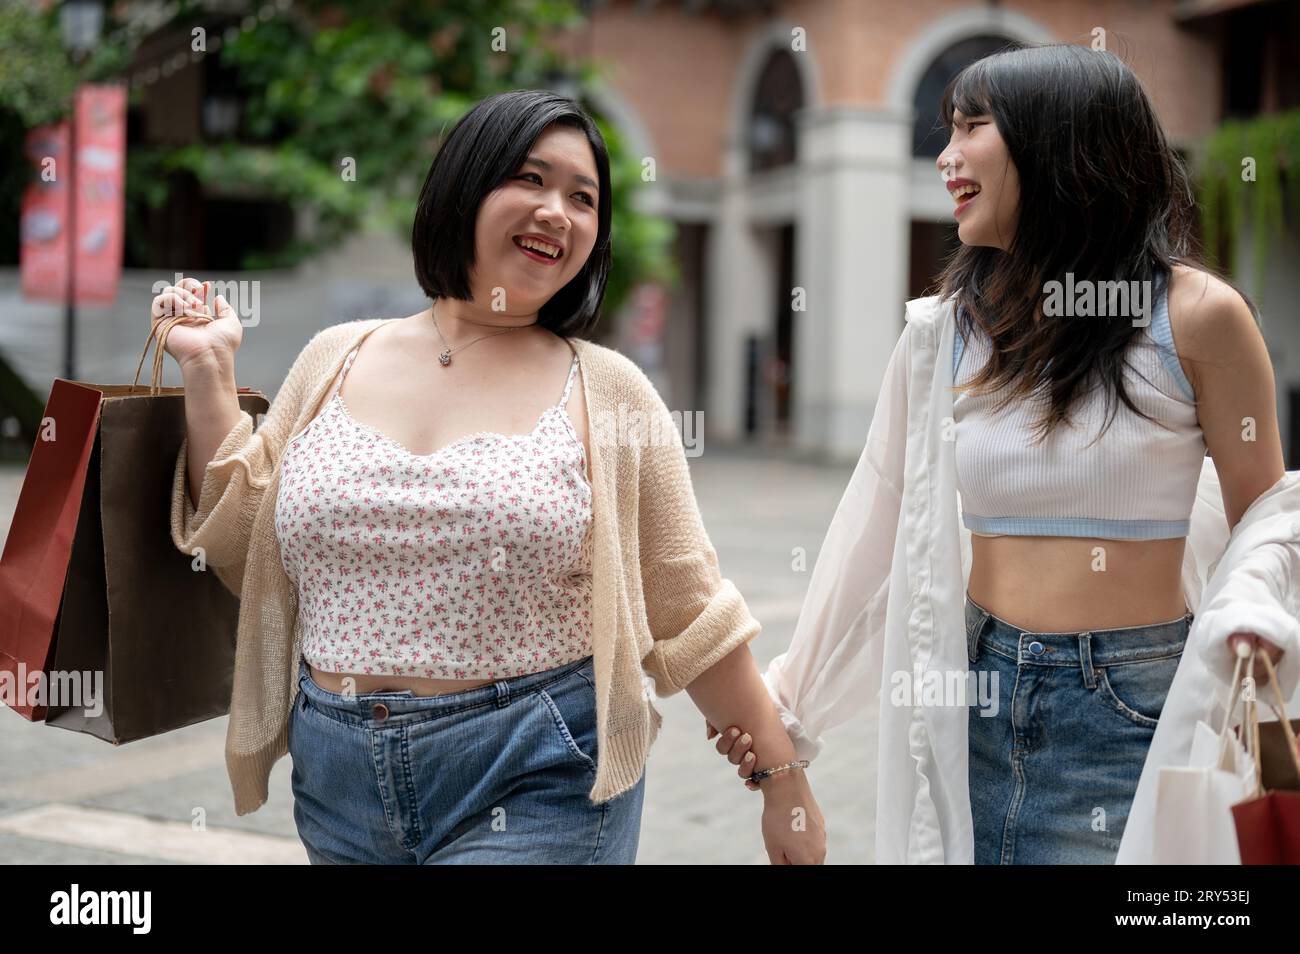 A cheerful and pretty Asian plus-size woman enjoys spending her weekend with her friend in the city and going on a shopping spree together. Stock Photo